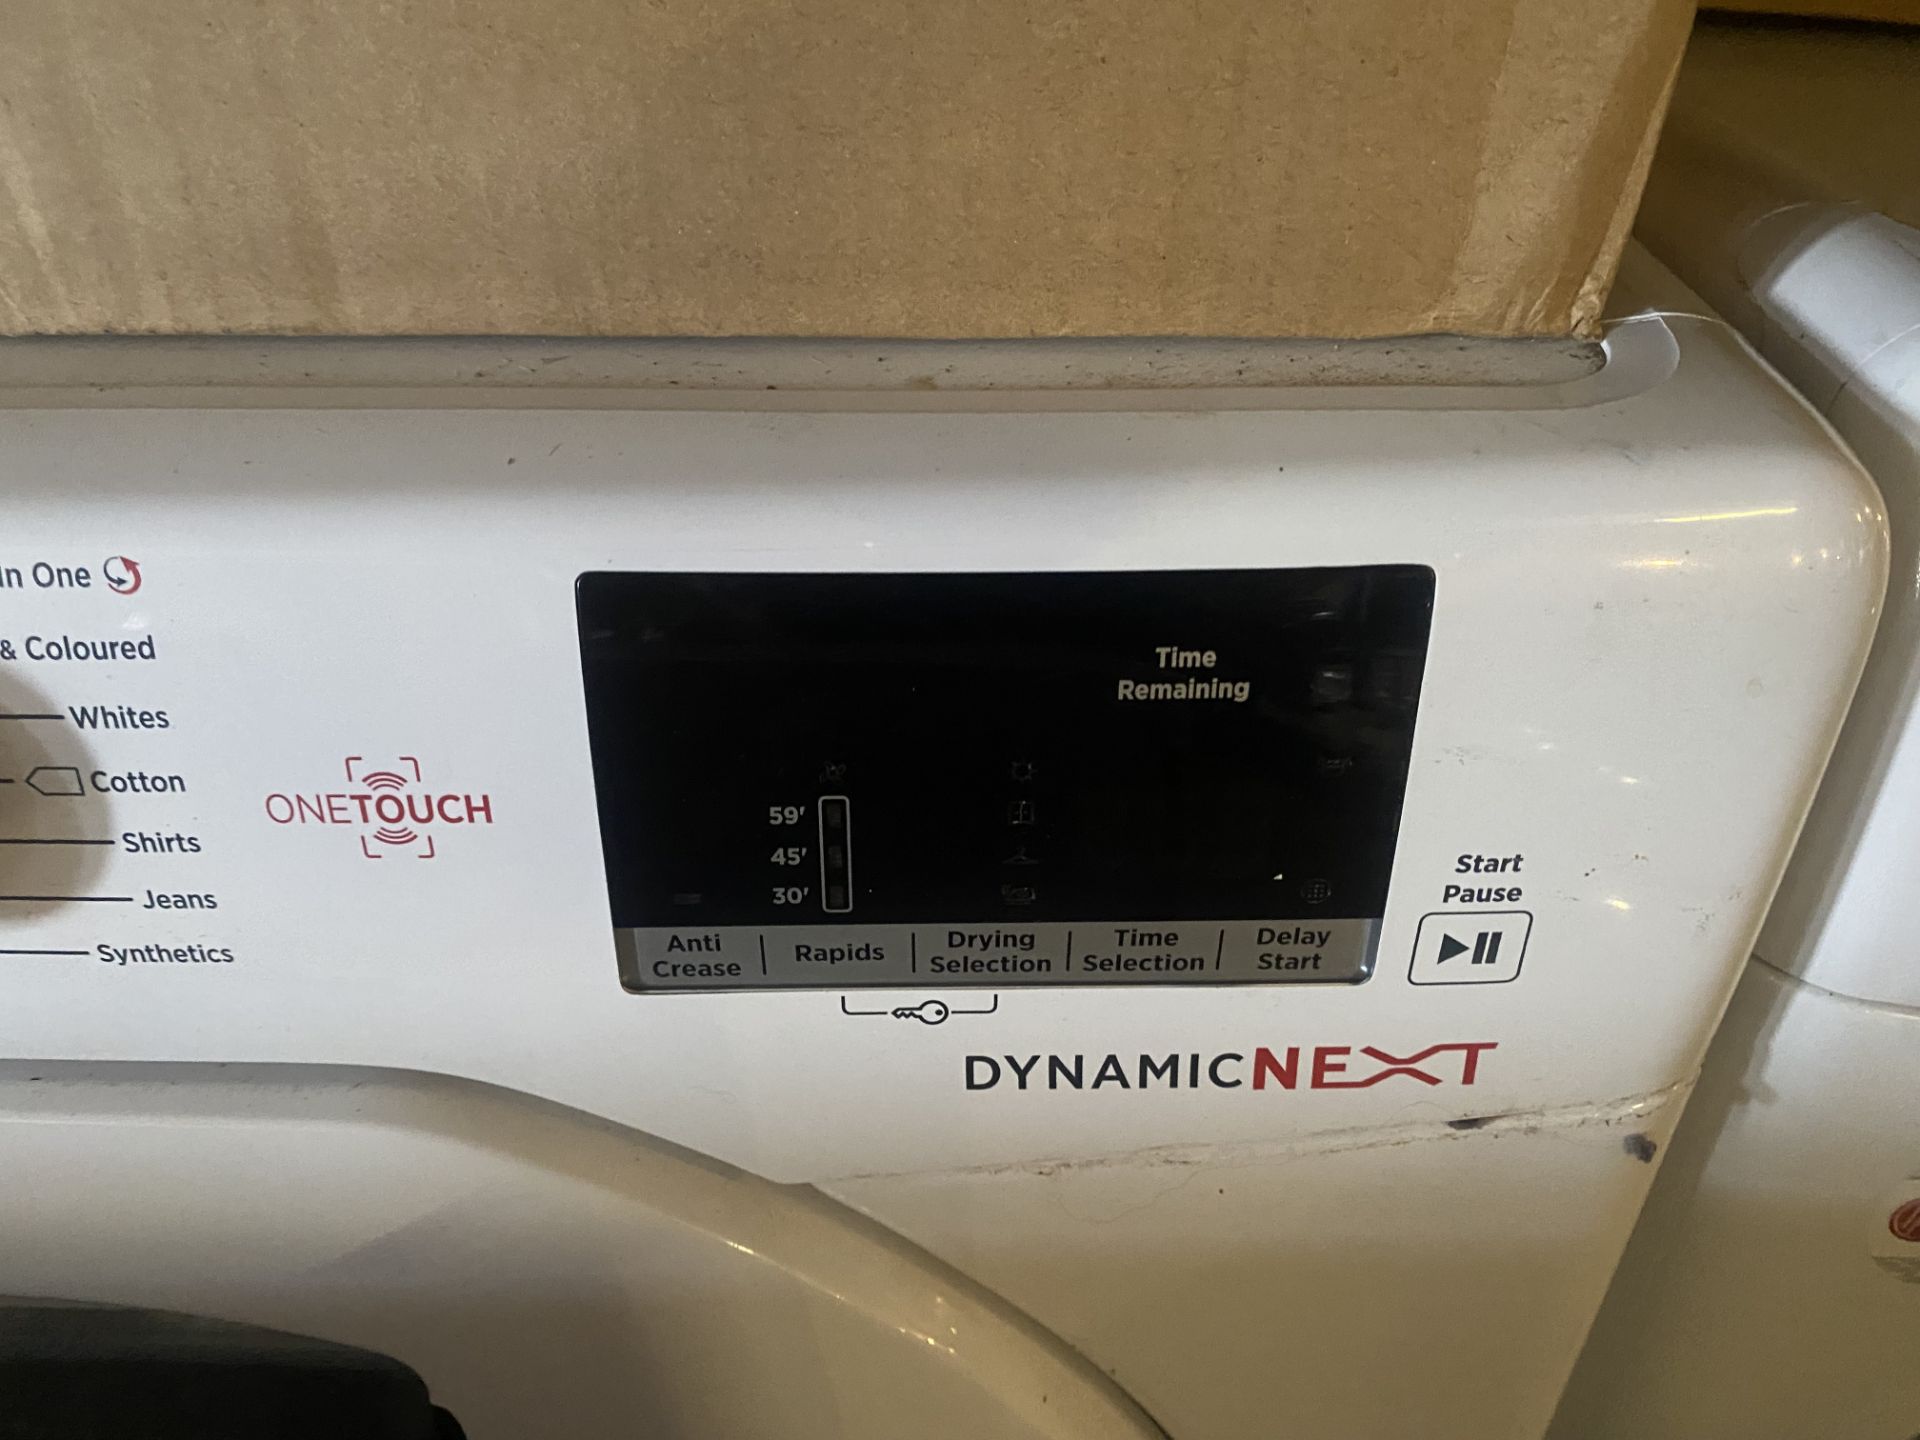 Hoover Link One Touch h10kg 1400spu washing machine and Hoover One Touch 10kg Dynamic Next tumble - Image 9 of 10